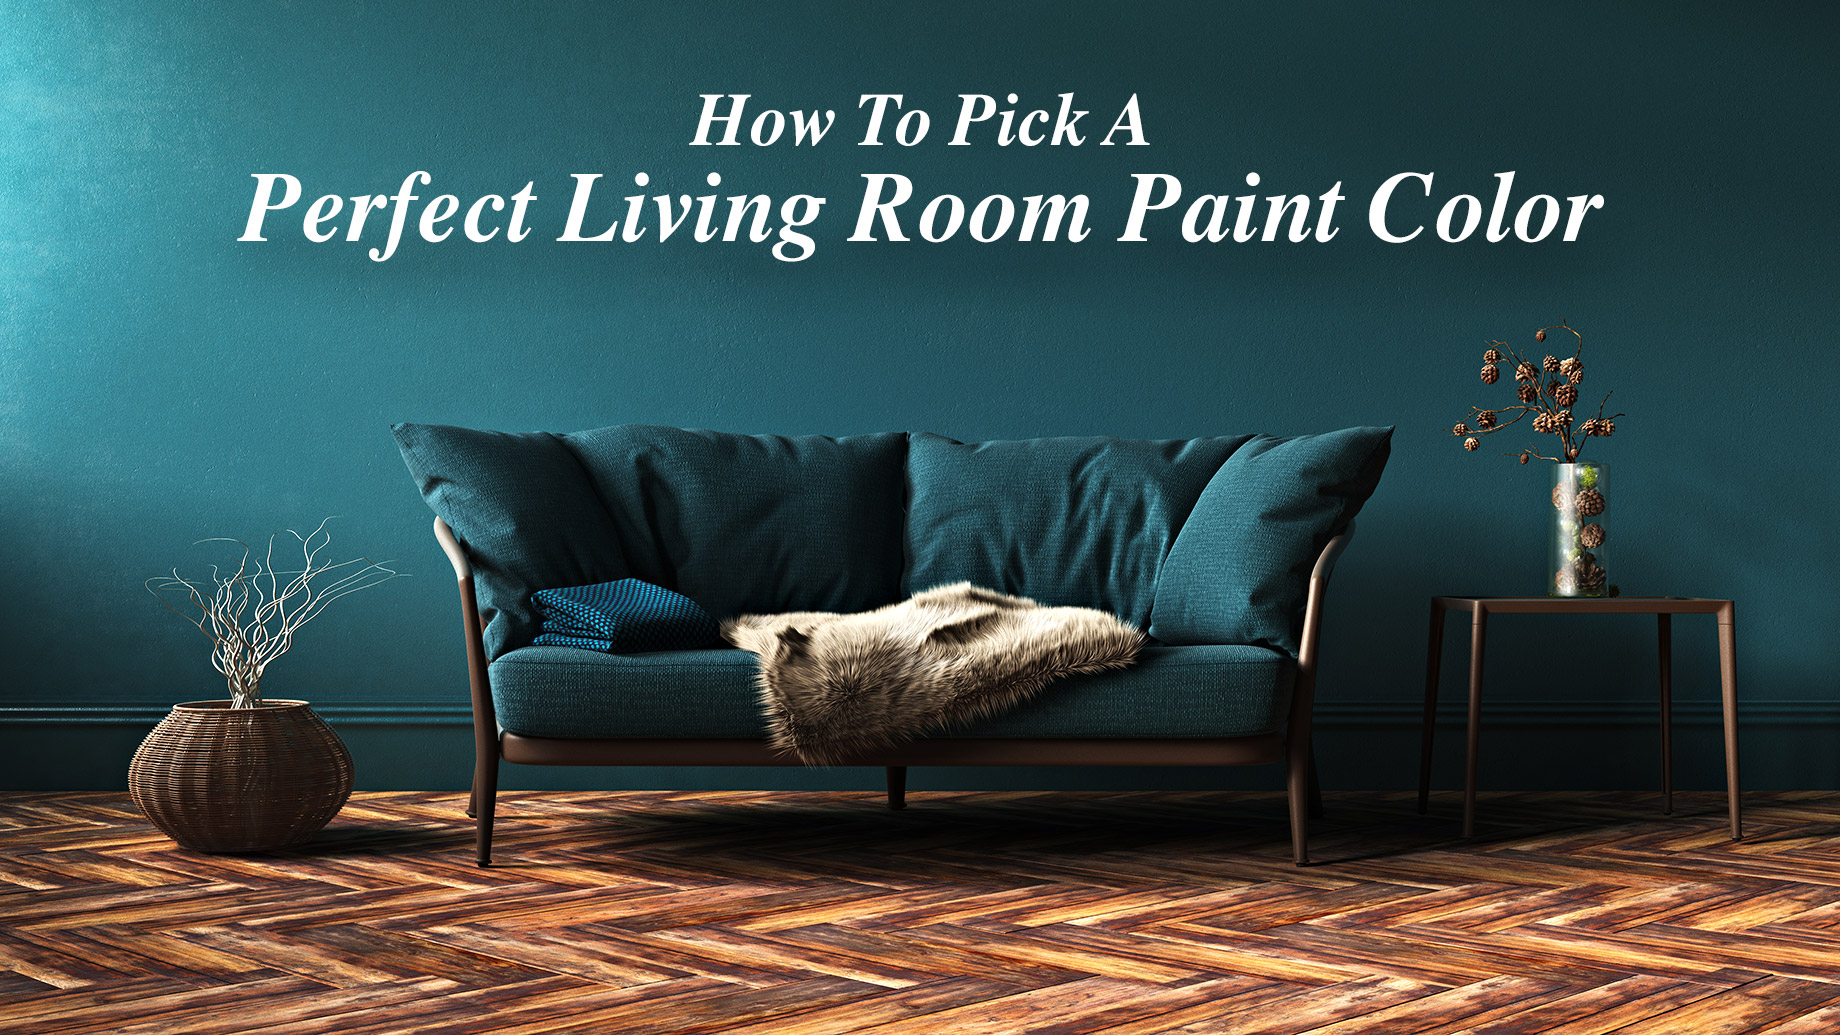 Perfect Living Room Paint Color, How To Pick Paint For Living Room